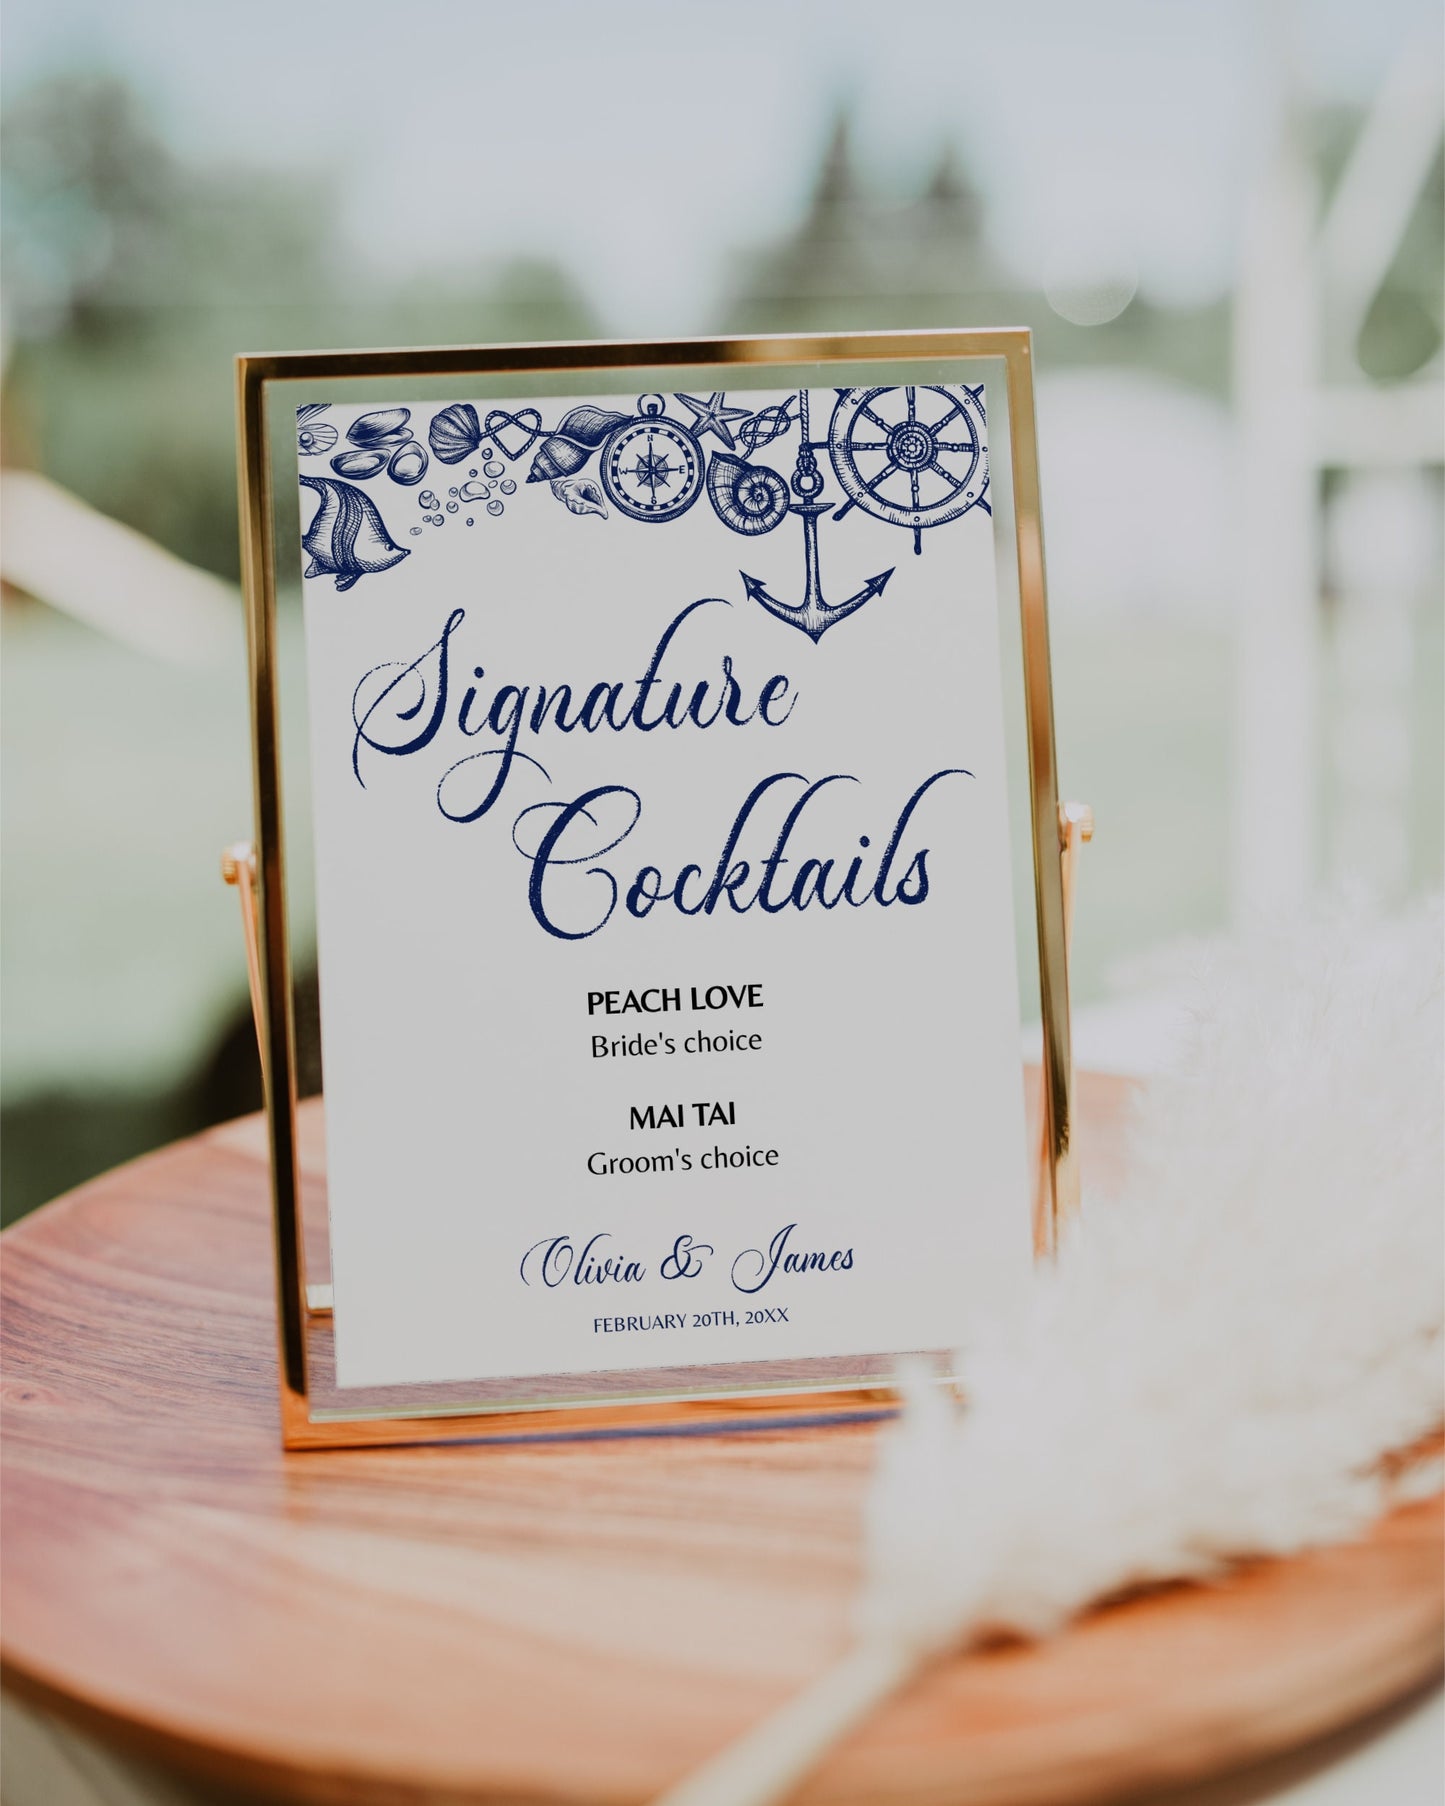 Wedding Signature Cocktail Sign Printable Template for Destination Wedding at the Beach with Nautical Elements